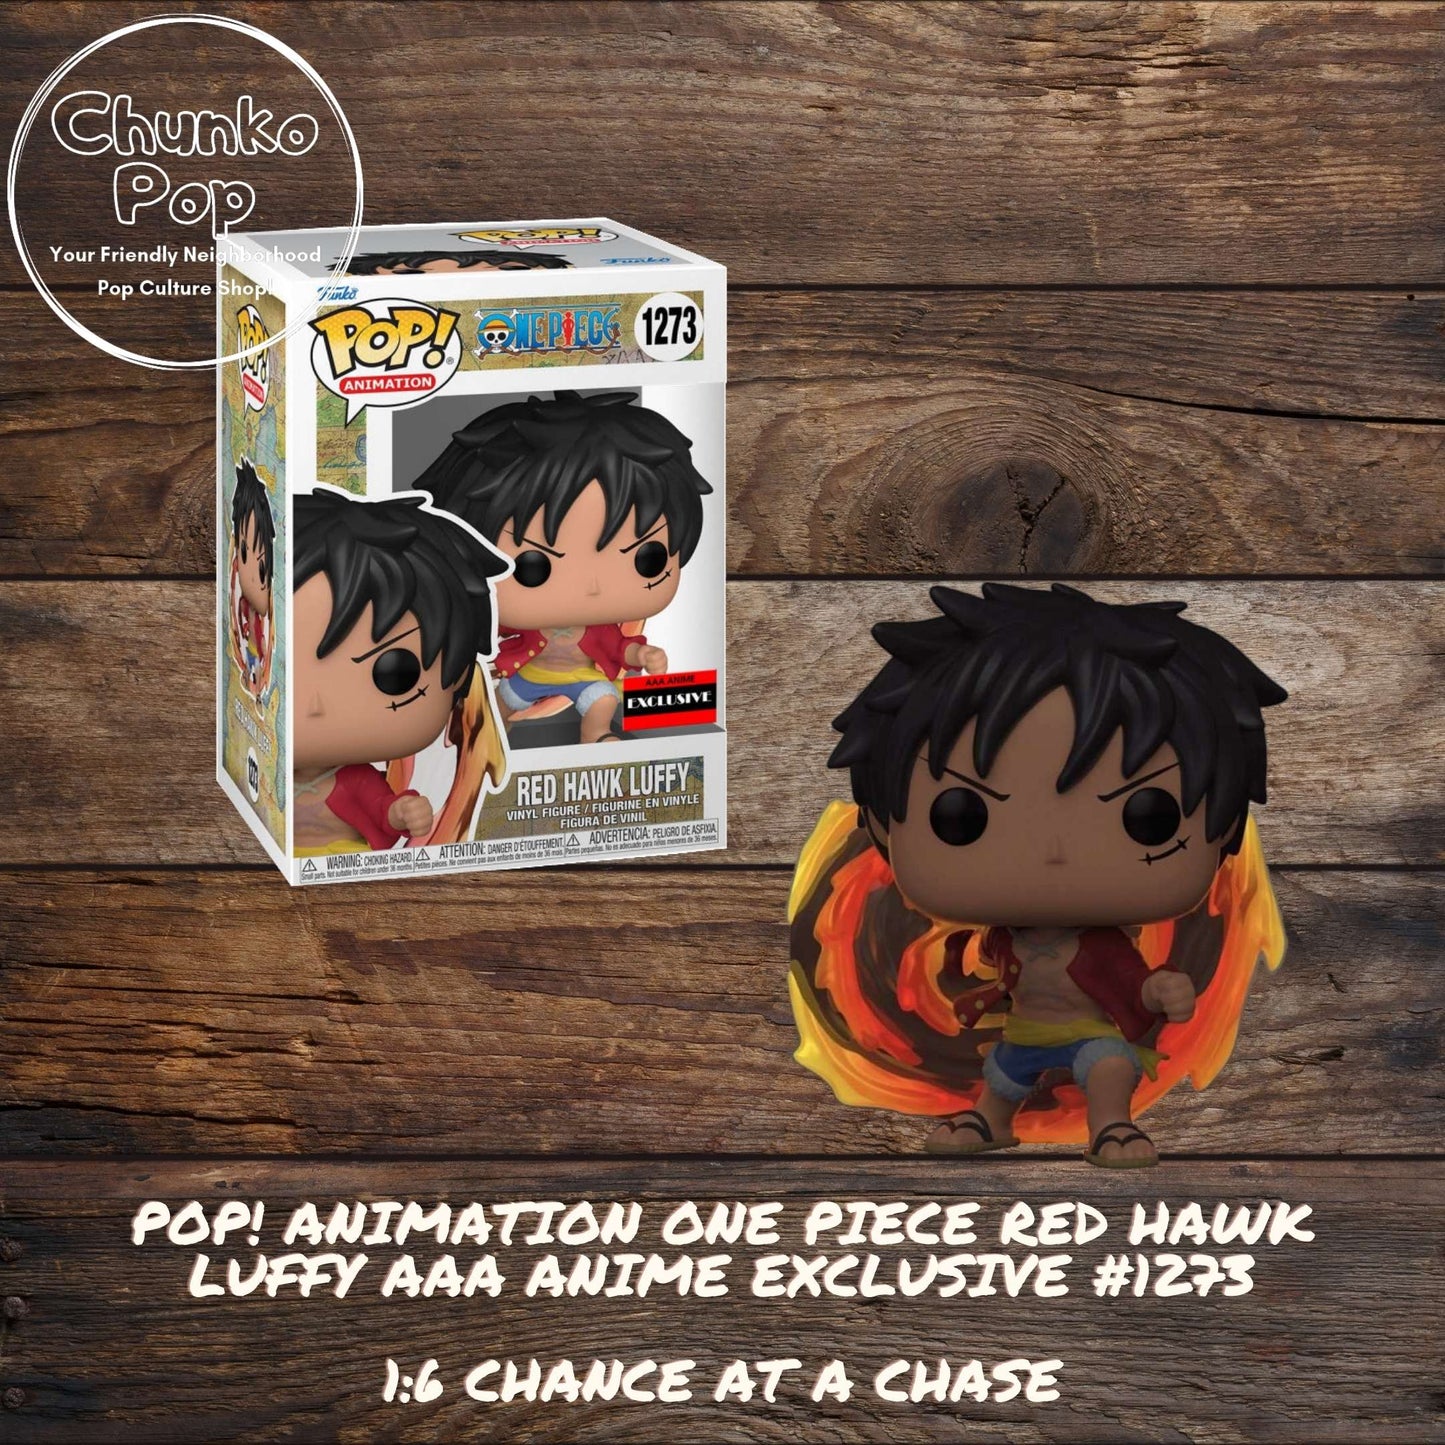 Red Hawk Luffy (One Piece) AAA Anime Exclusive Funko Pop!